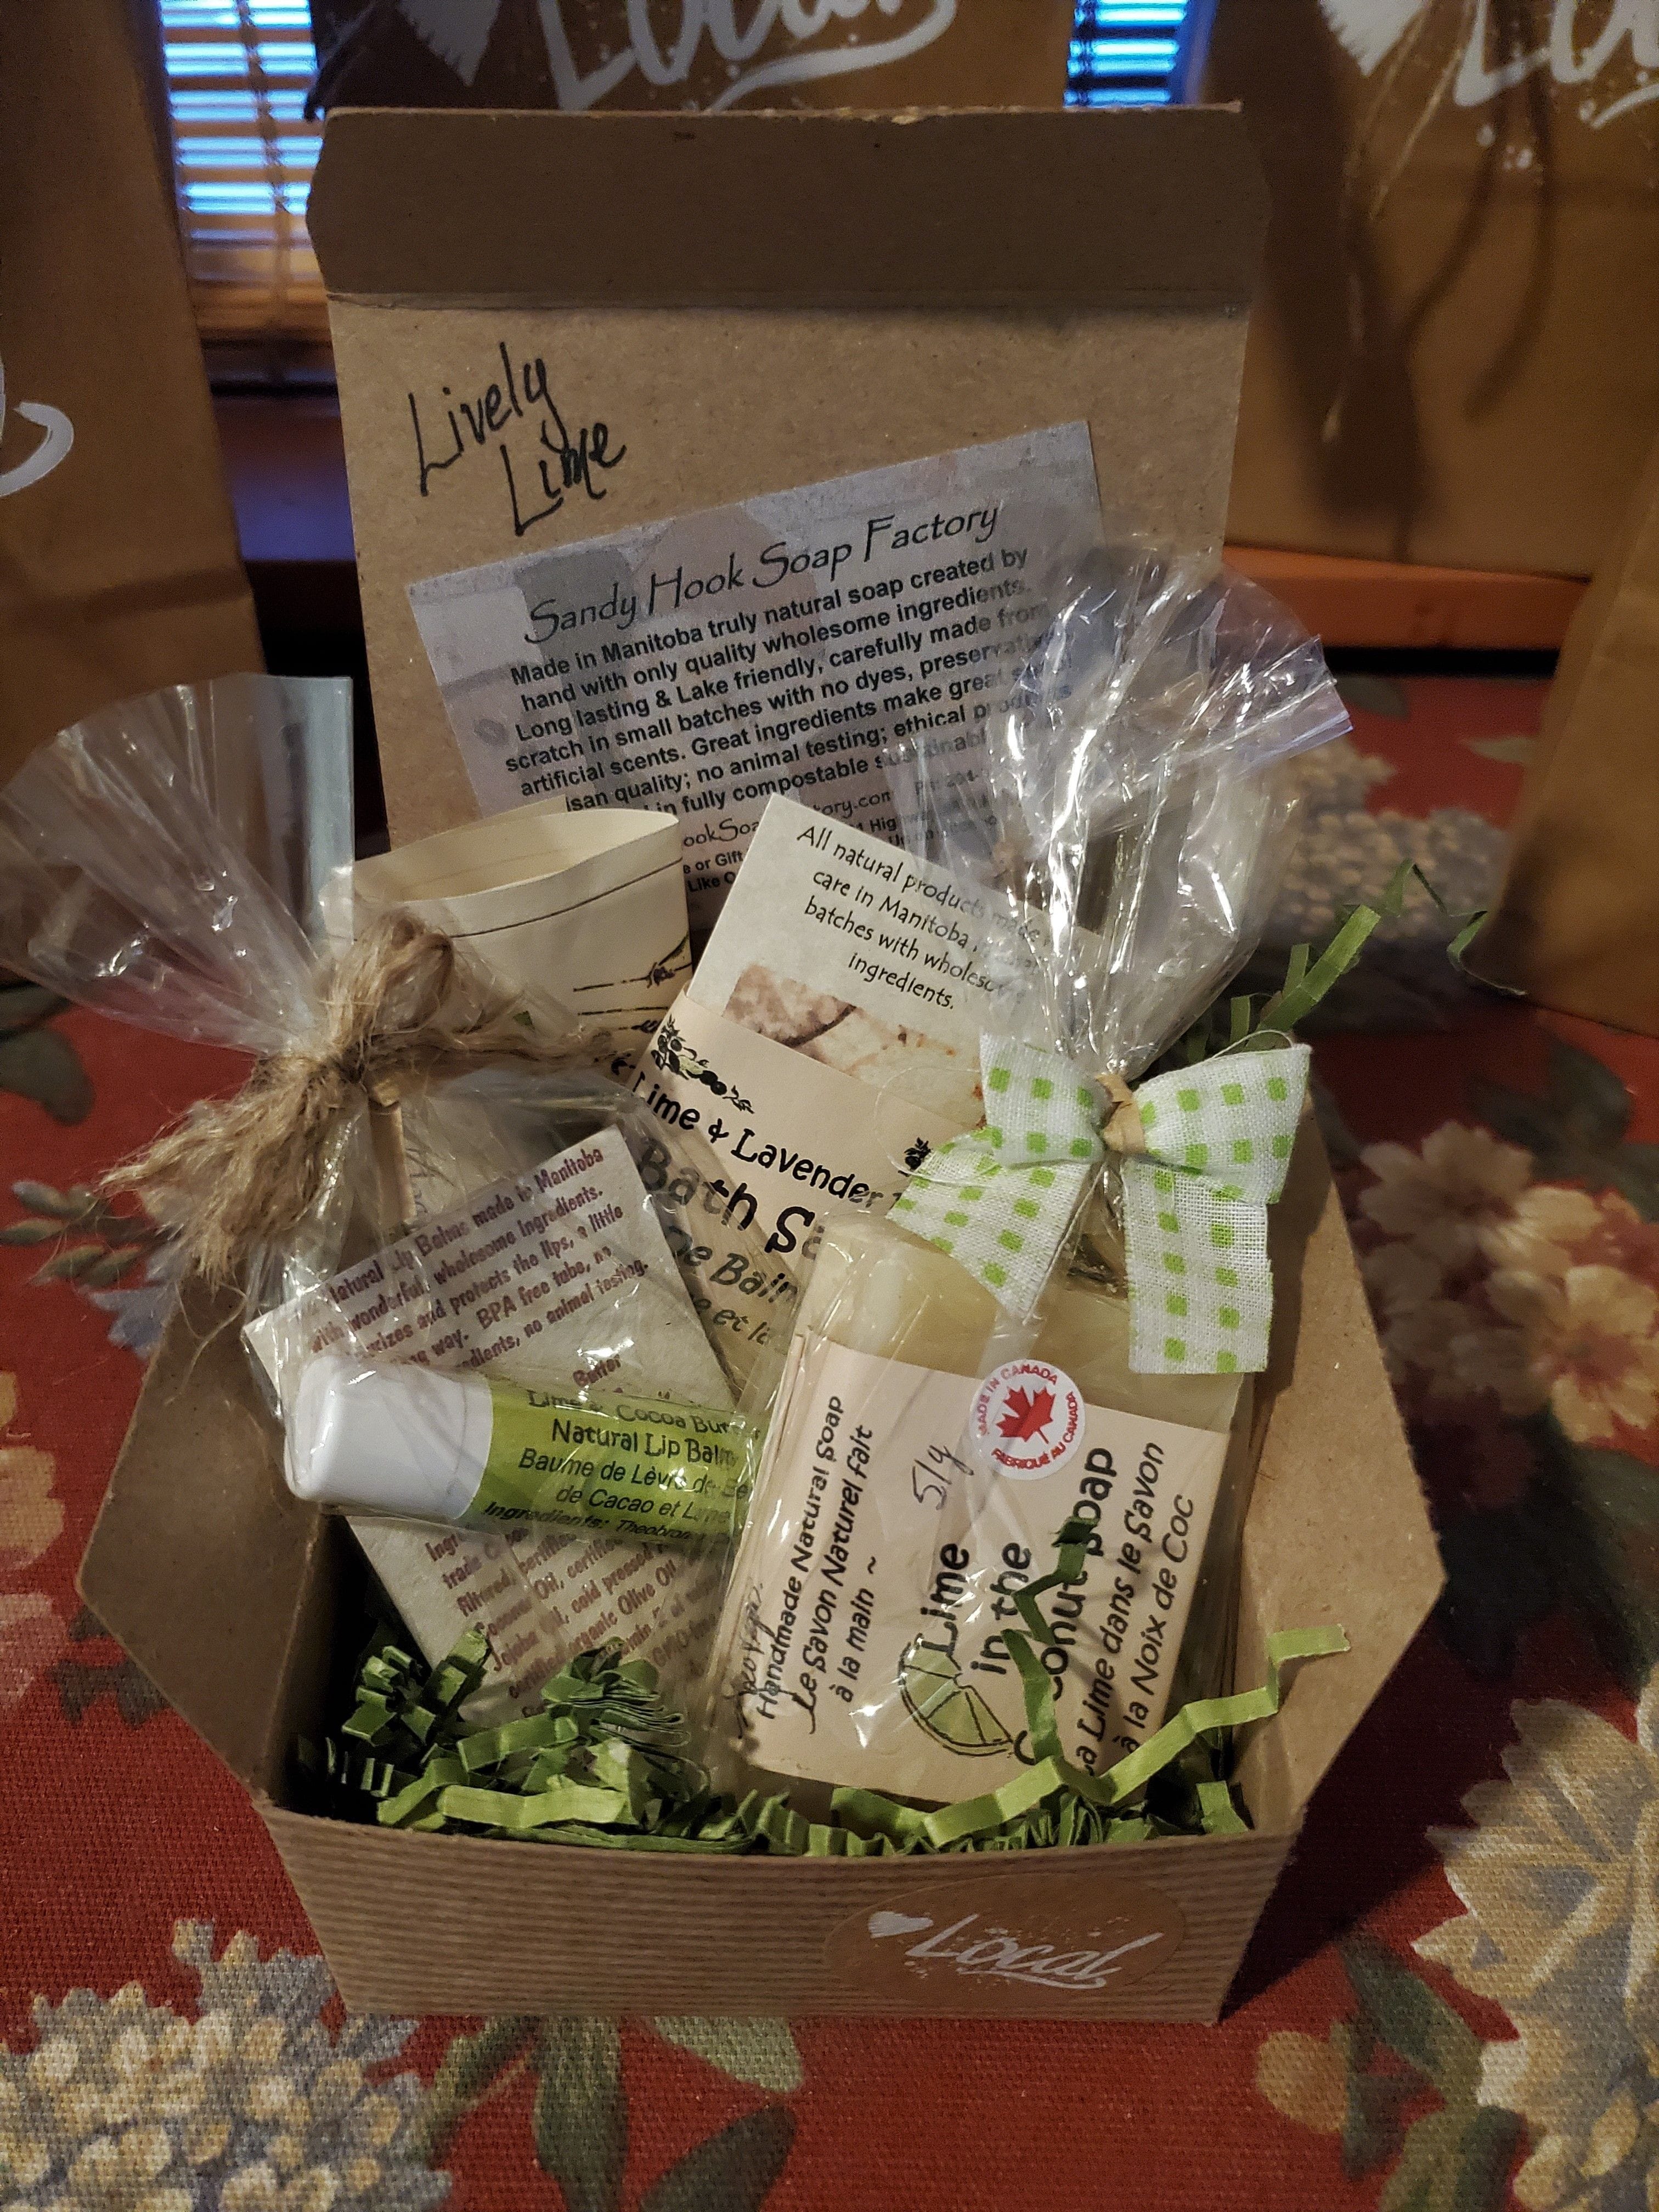 We create reasonably priced soap gifts for everyone on your list, handmade in Canada from wholesome natural ingredients.  No animal testing, vegan selections.